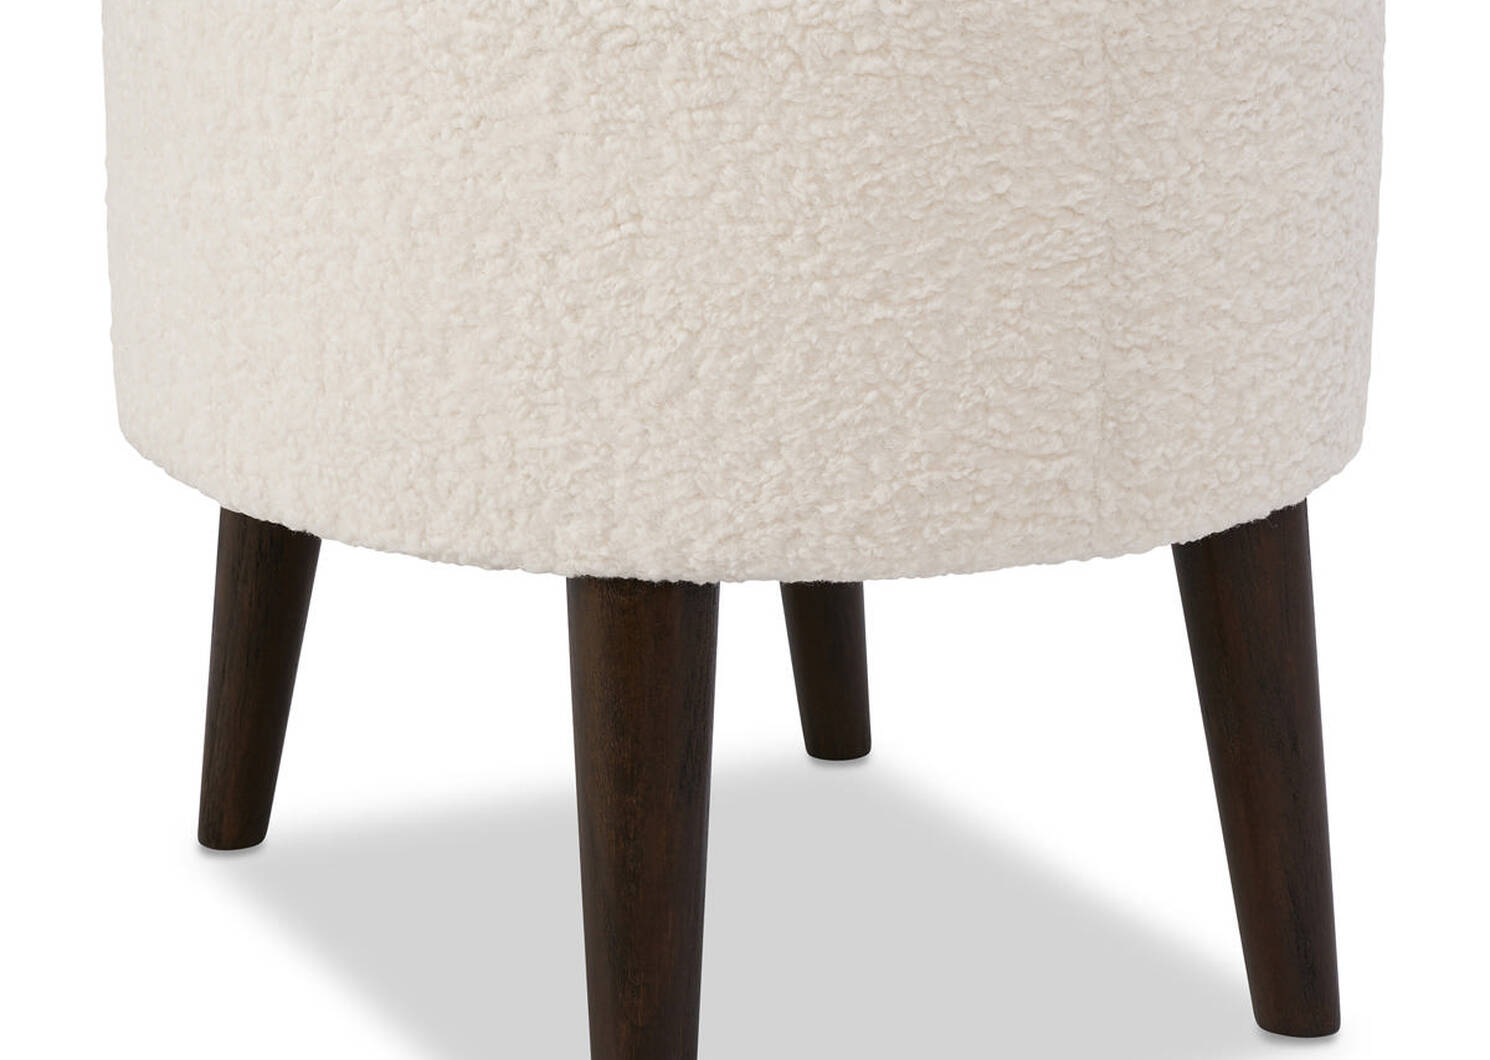 Dolly Ottoman -Woolly Natural